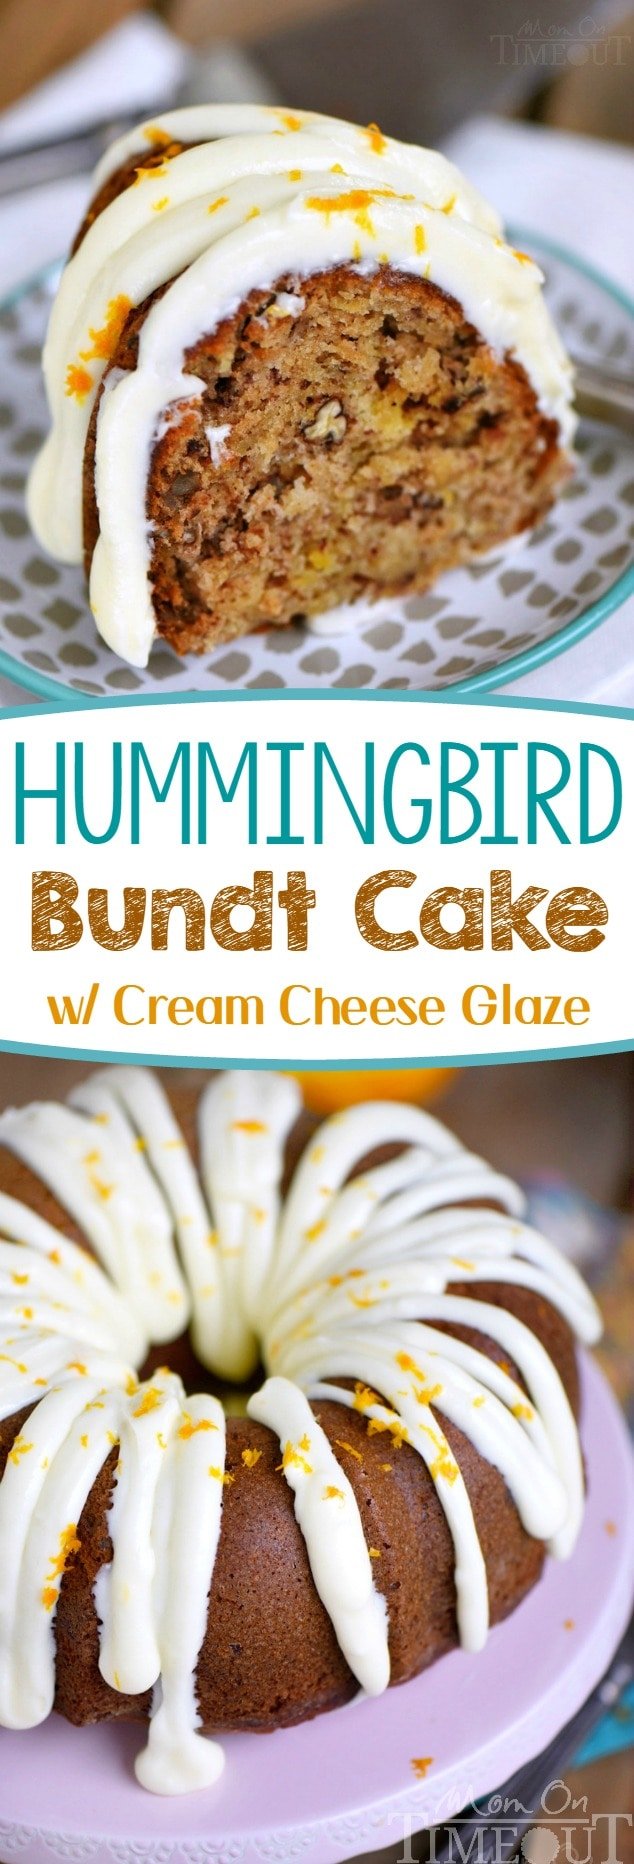 Hummingbird Bundt Cake with Cream Cheese Glaze will be the star of the show! This delightfully moist cake is made with bananas, pineapple, pecans and spiced with cinnamon, cloves and nutmeg - every bite of this easy cake is pure bliss! | Mom On Timeout